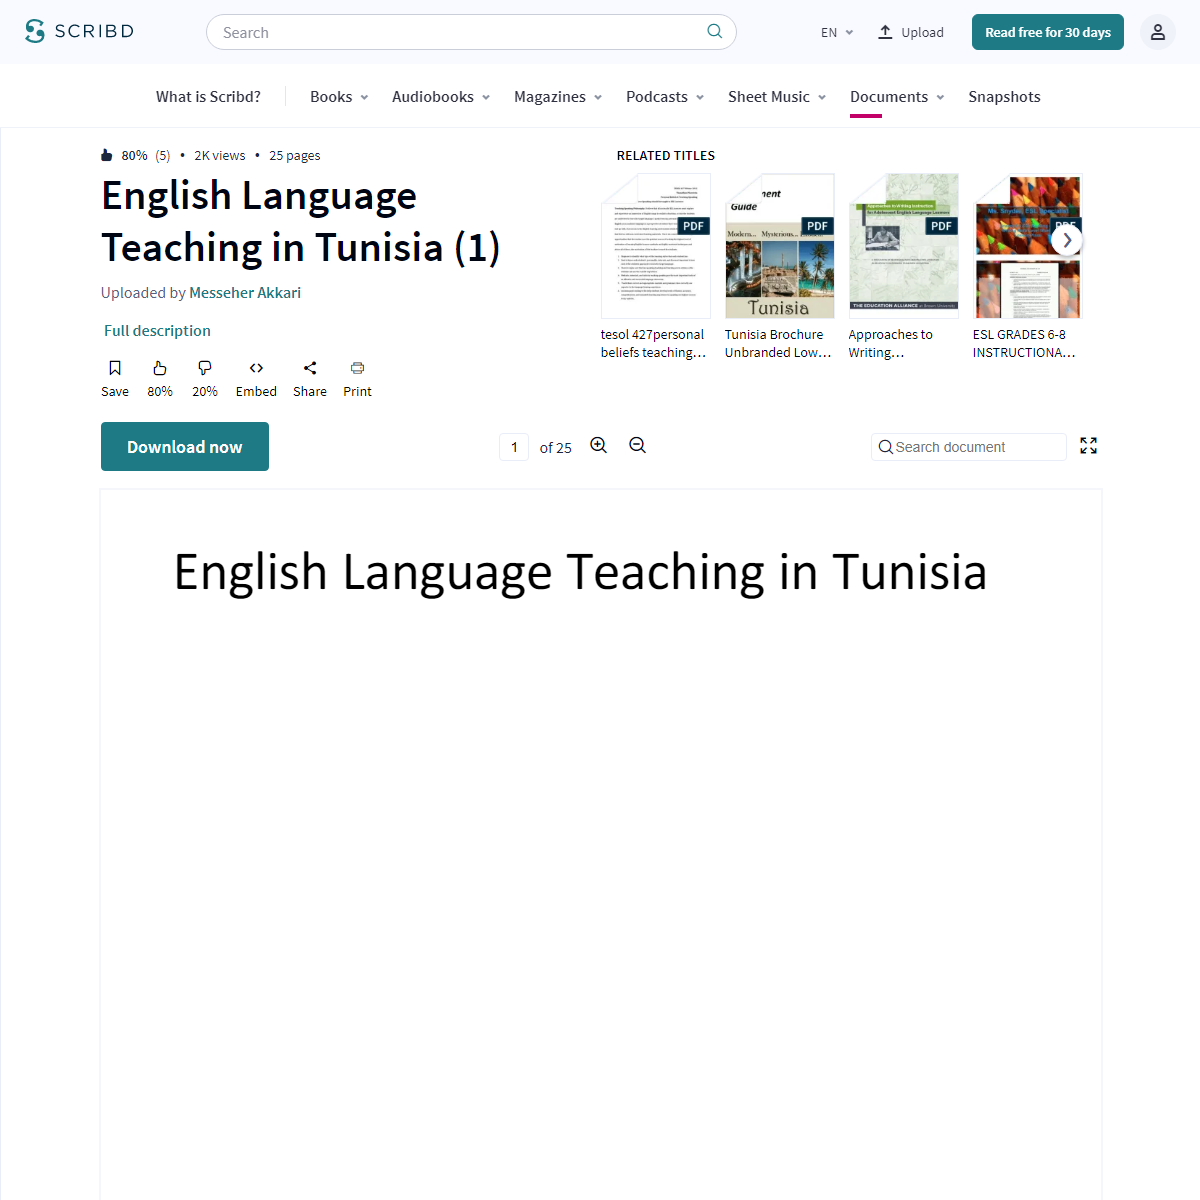 A complete backup of https://www.scribd.com/doc/116369620/English-Language-Teaching-in-Tunisia-1